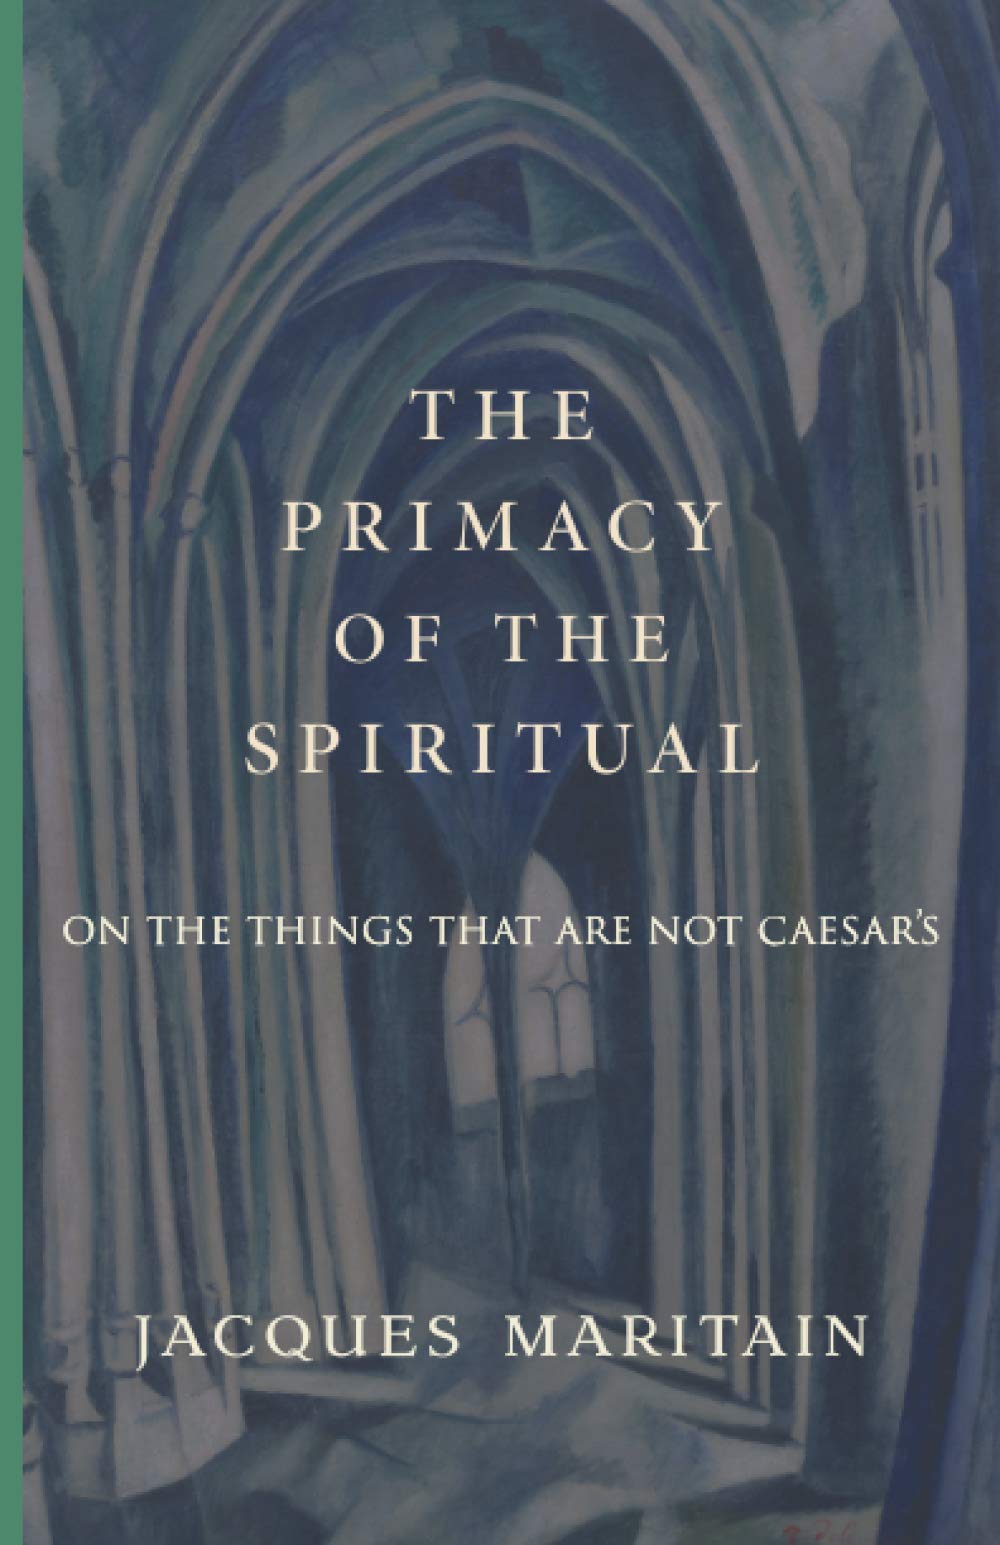 Maritain, Jacques: The Primacy of the Spiritual